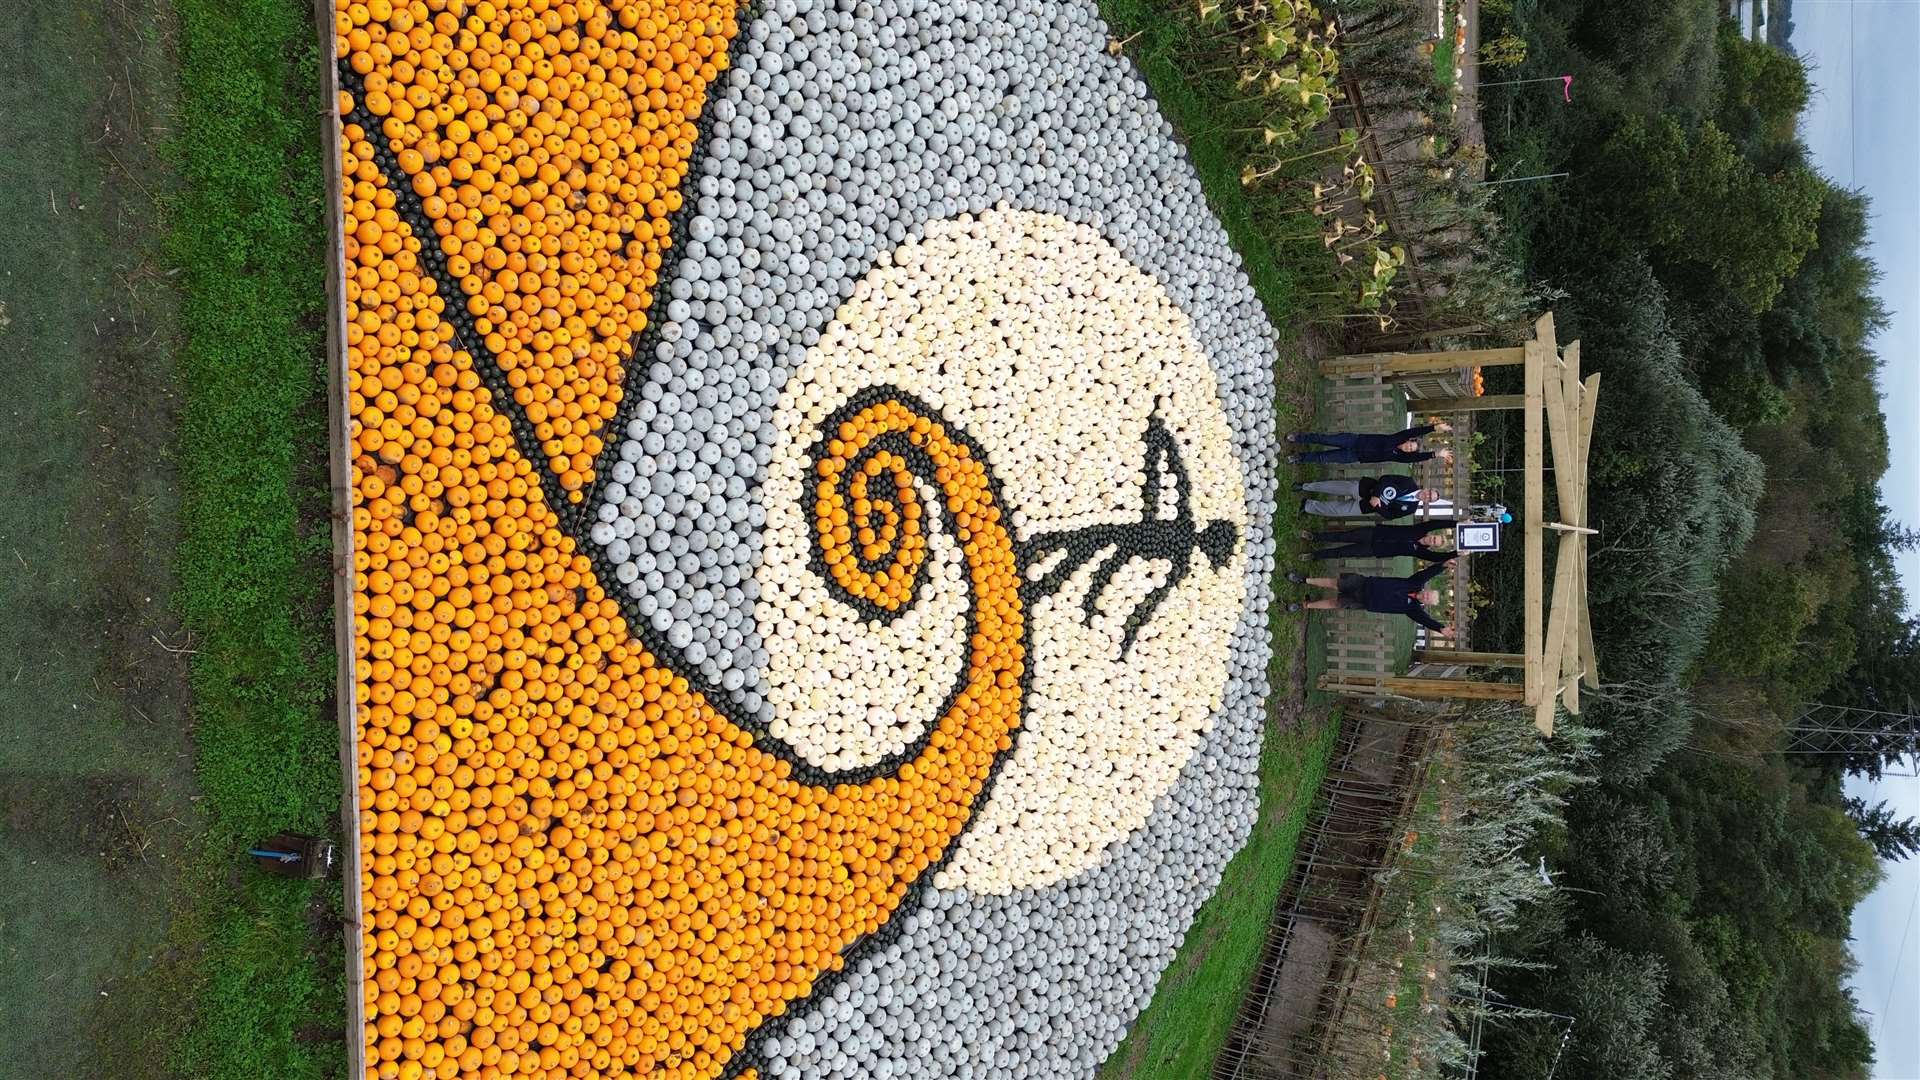 The trickiest part of the mosaic was the spiral (Guinness World Records)